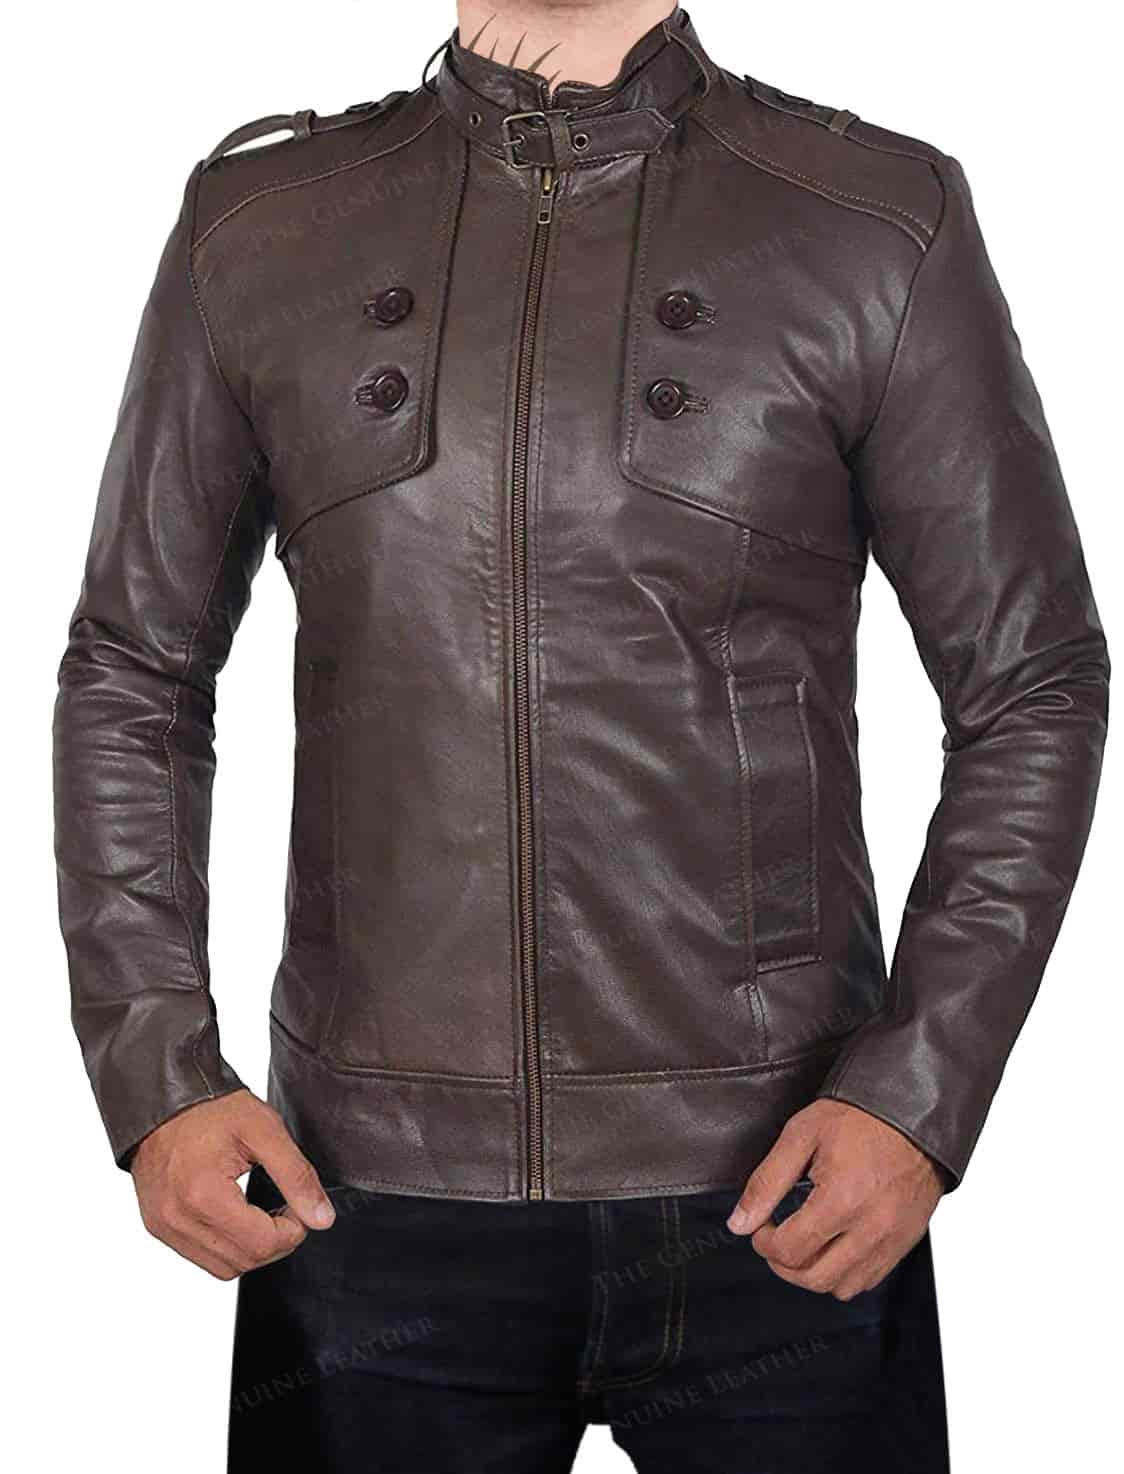 Chocolate Bown Leather Jacket